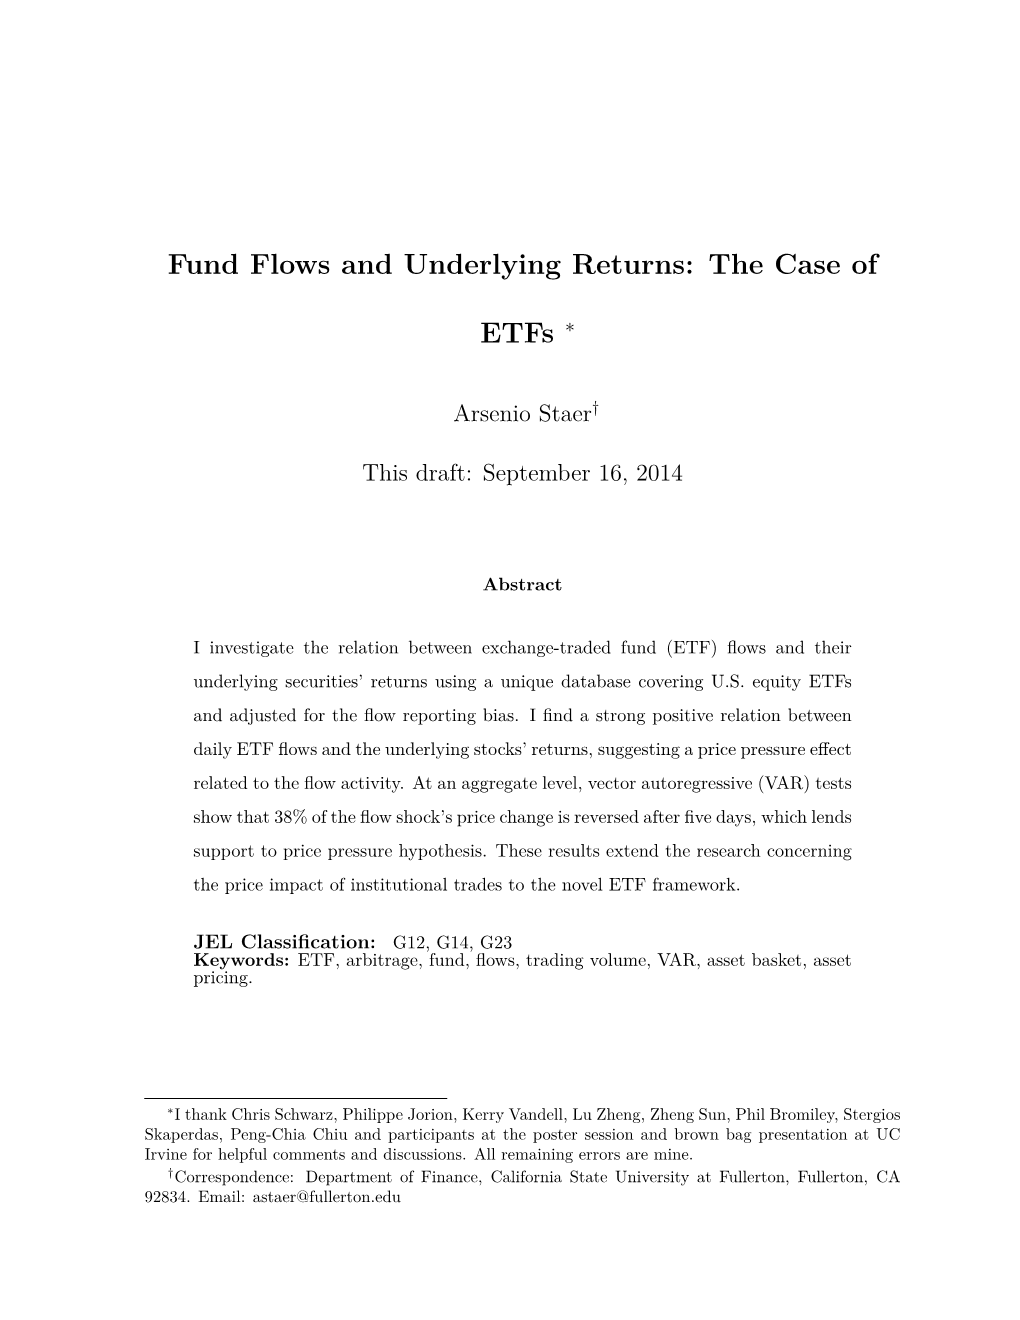 Fund Flows and Underlying Returns: the Case of Etfs